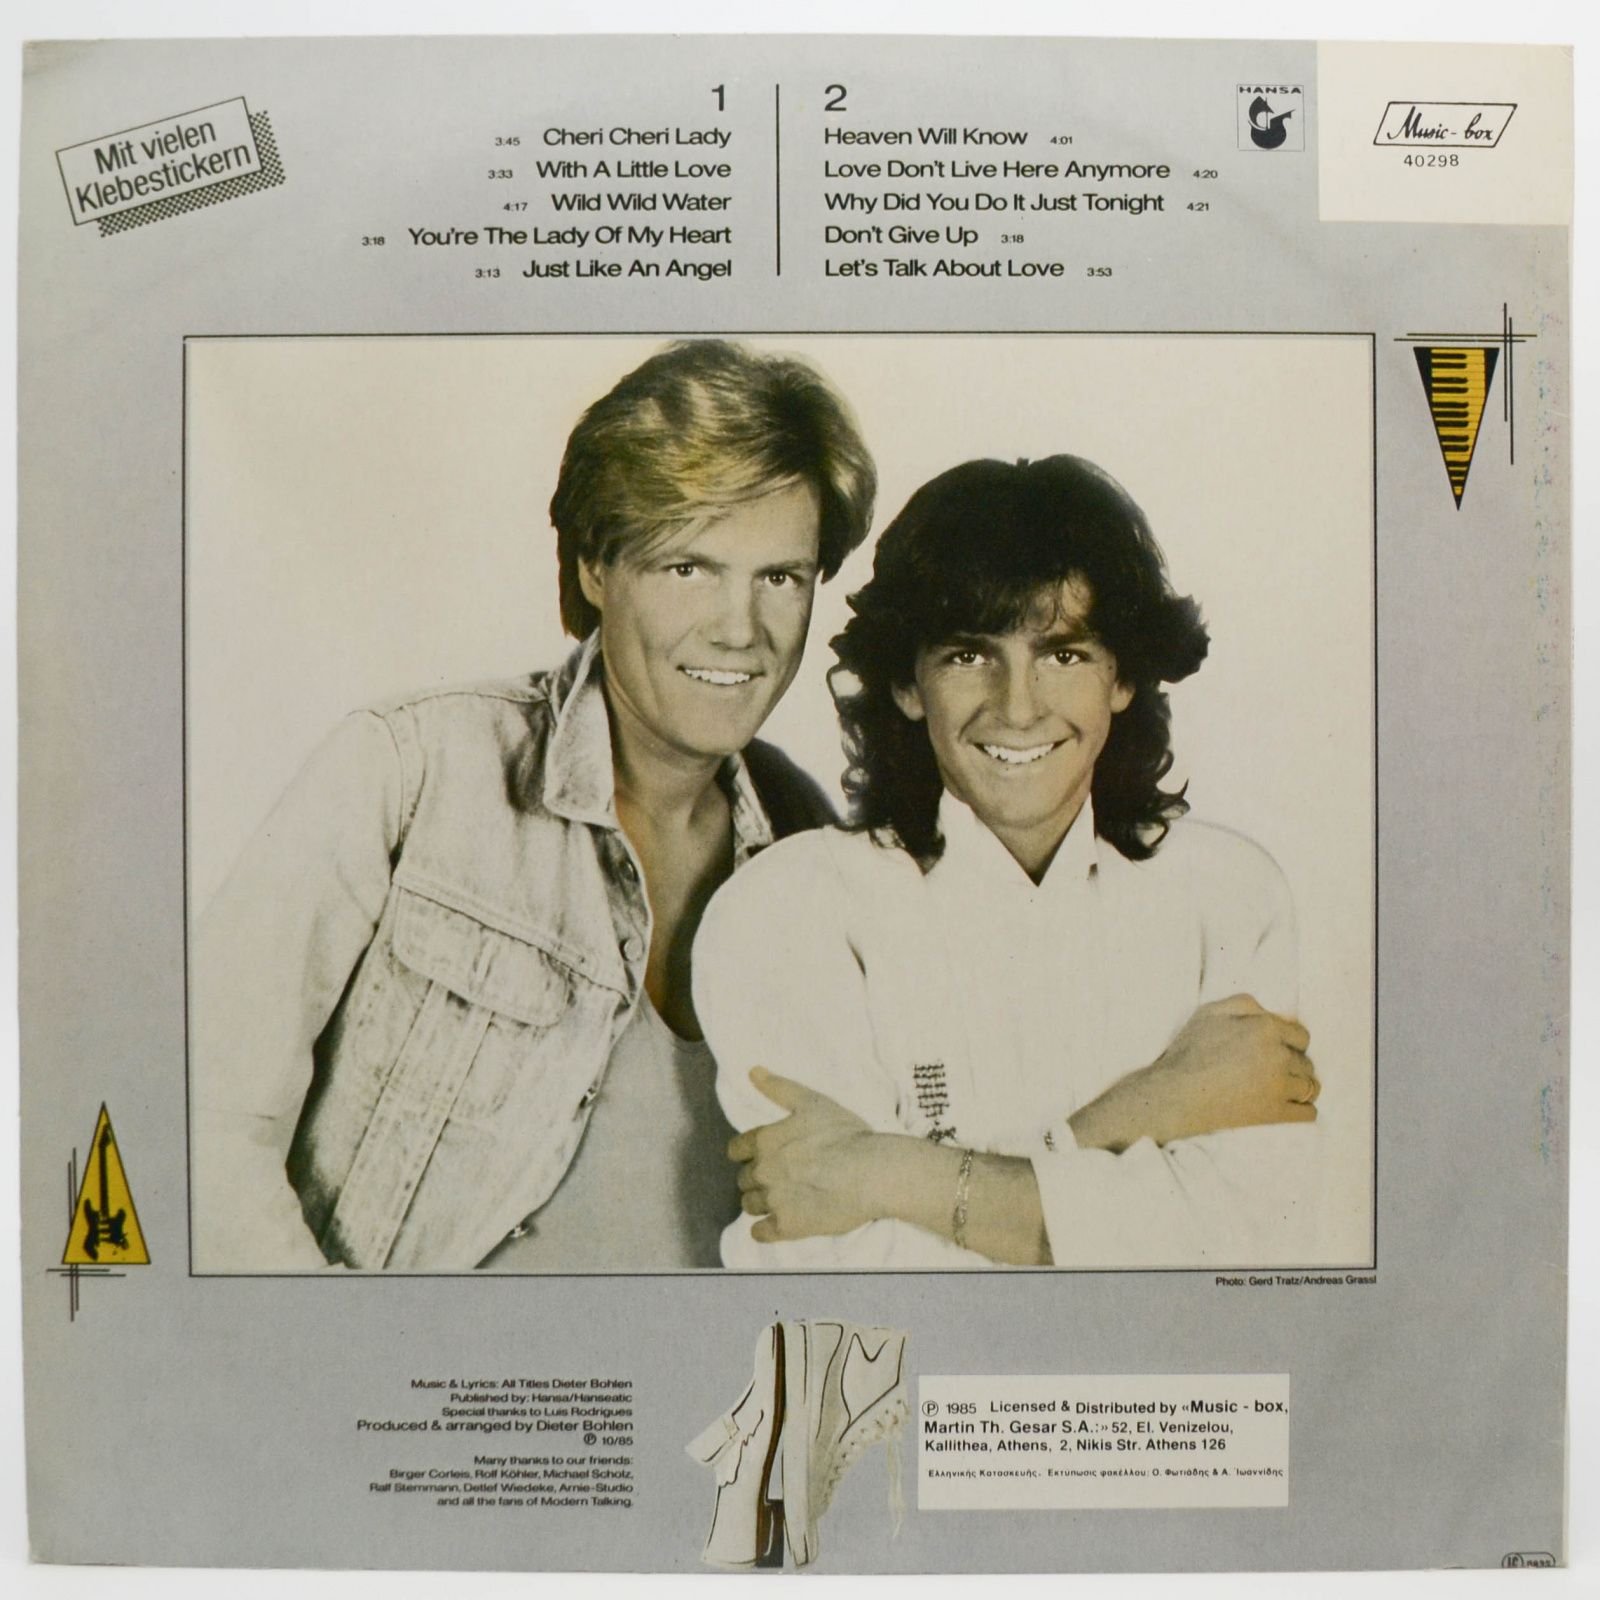 Modern Talking — Let's Talk About Love - The 2nd Album, 1985